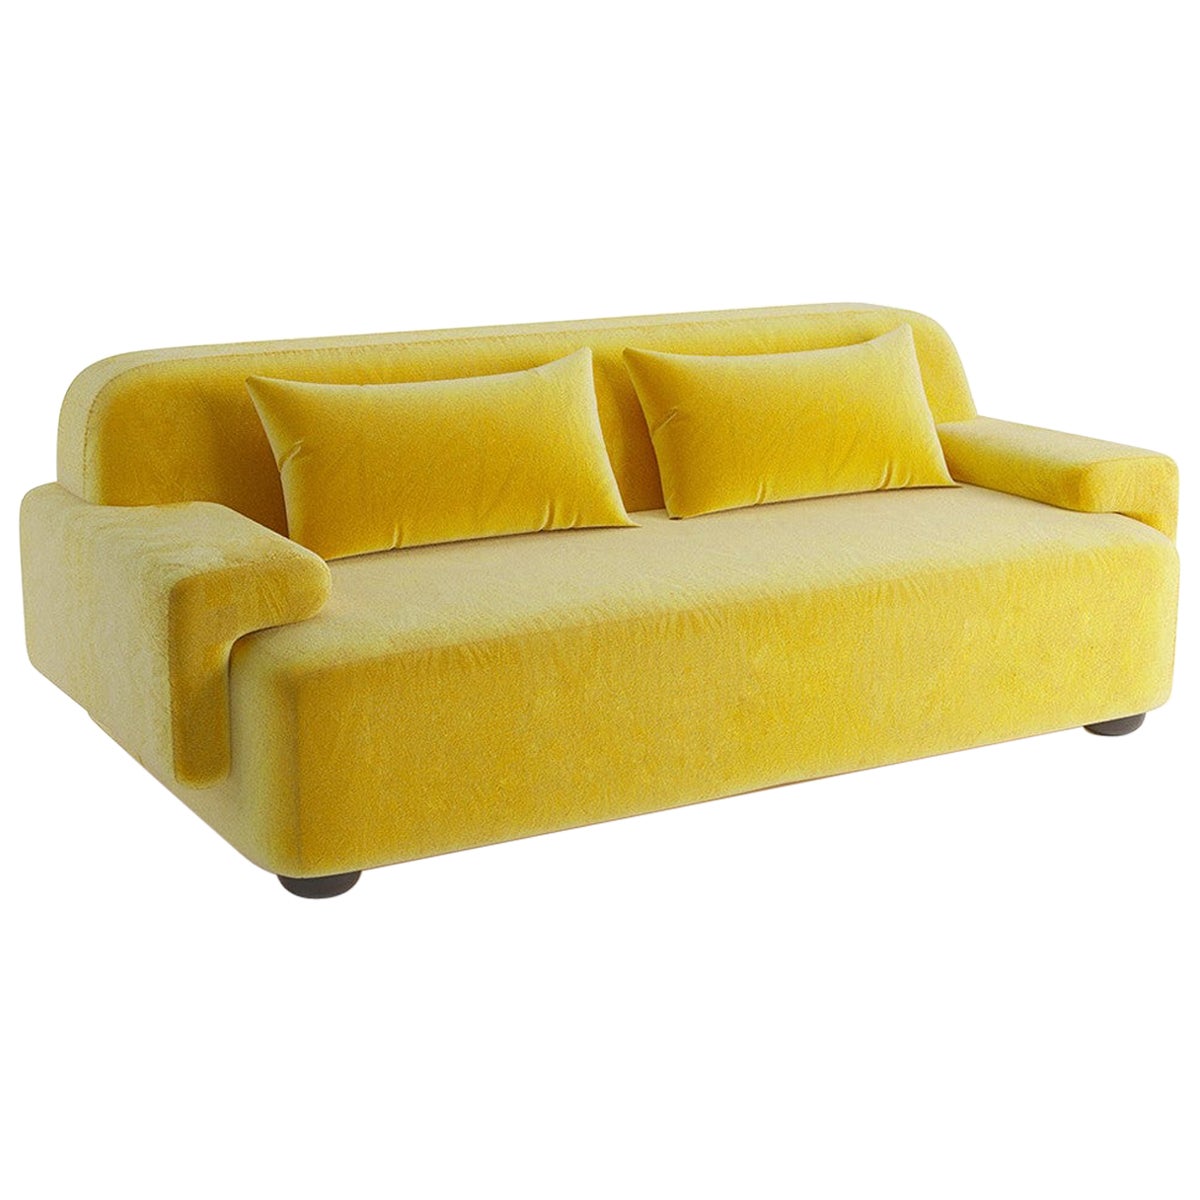 Popus Editions Lena 4 Seater Sofa in Yellow Verone Velvet Upholstery For Sale